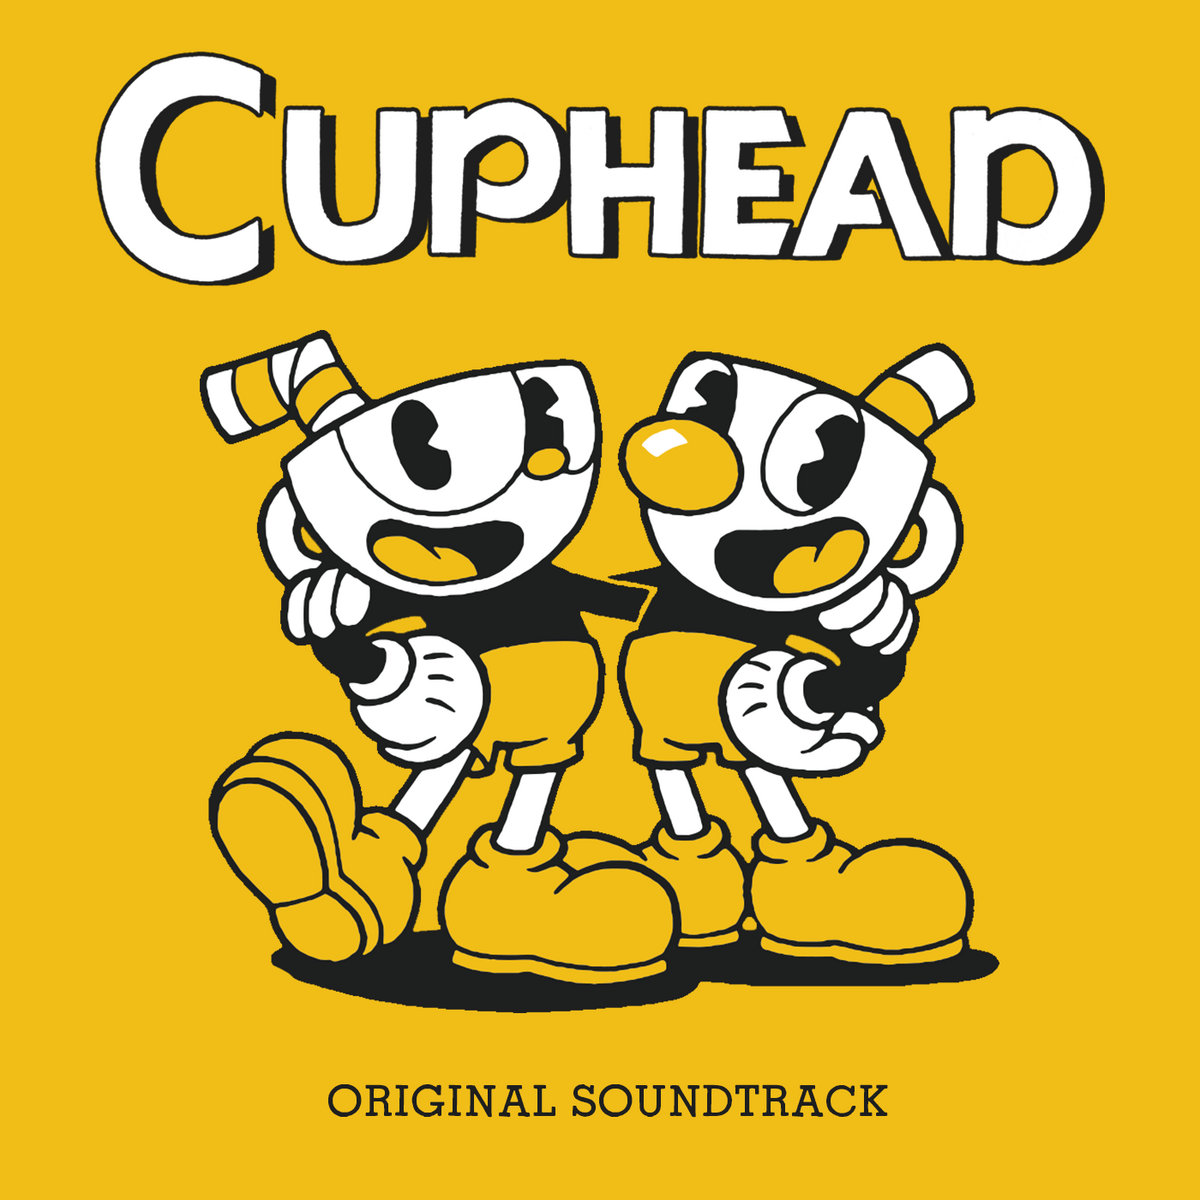 mobile-games-with-fantastic-soundtracks-part-3-cuphead